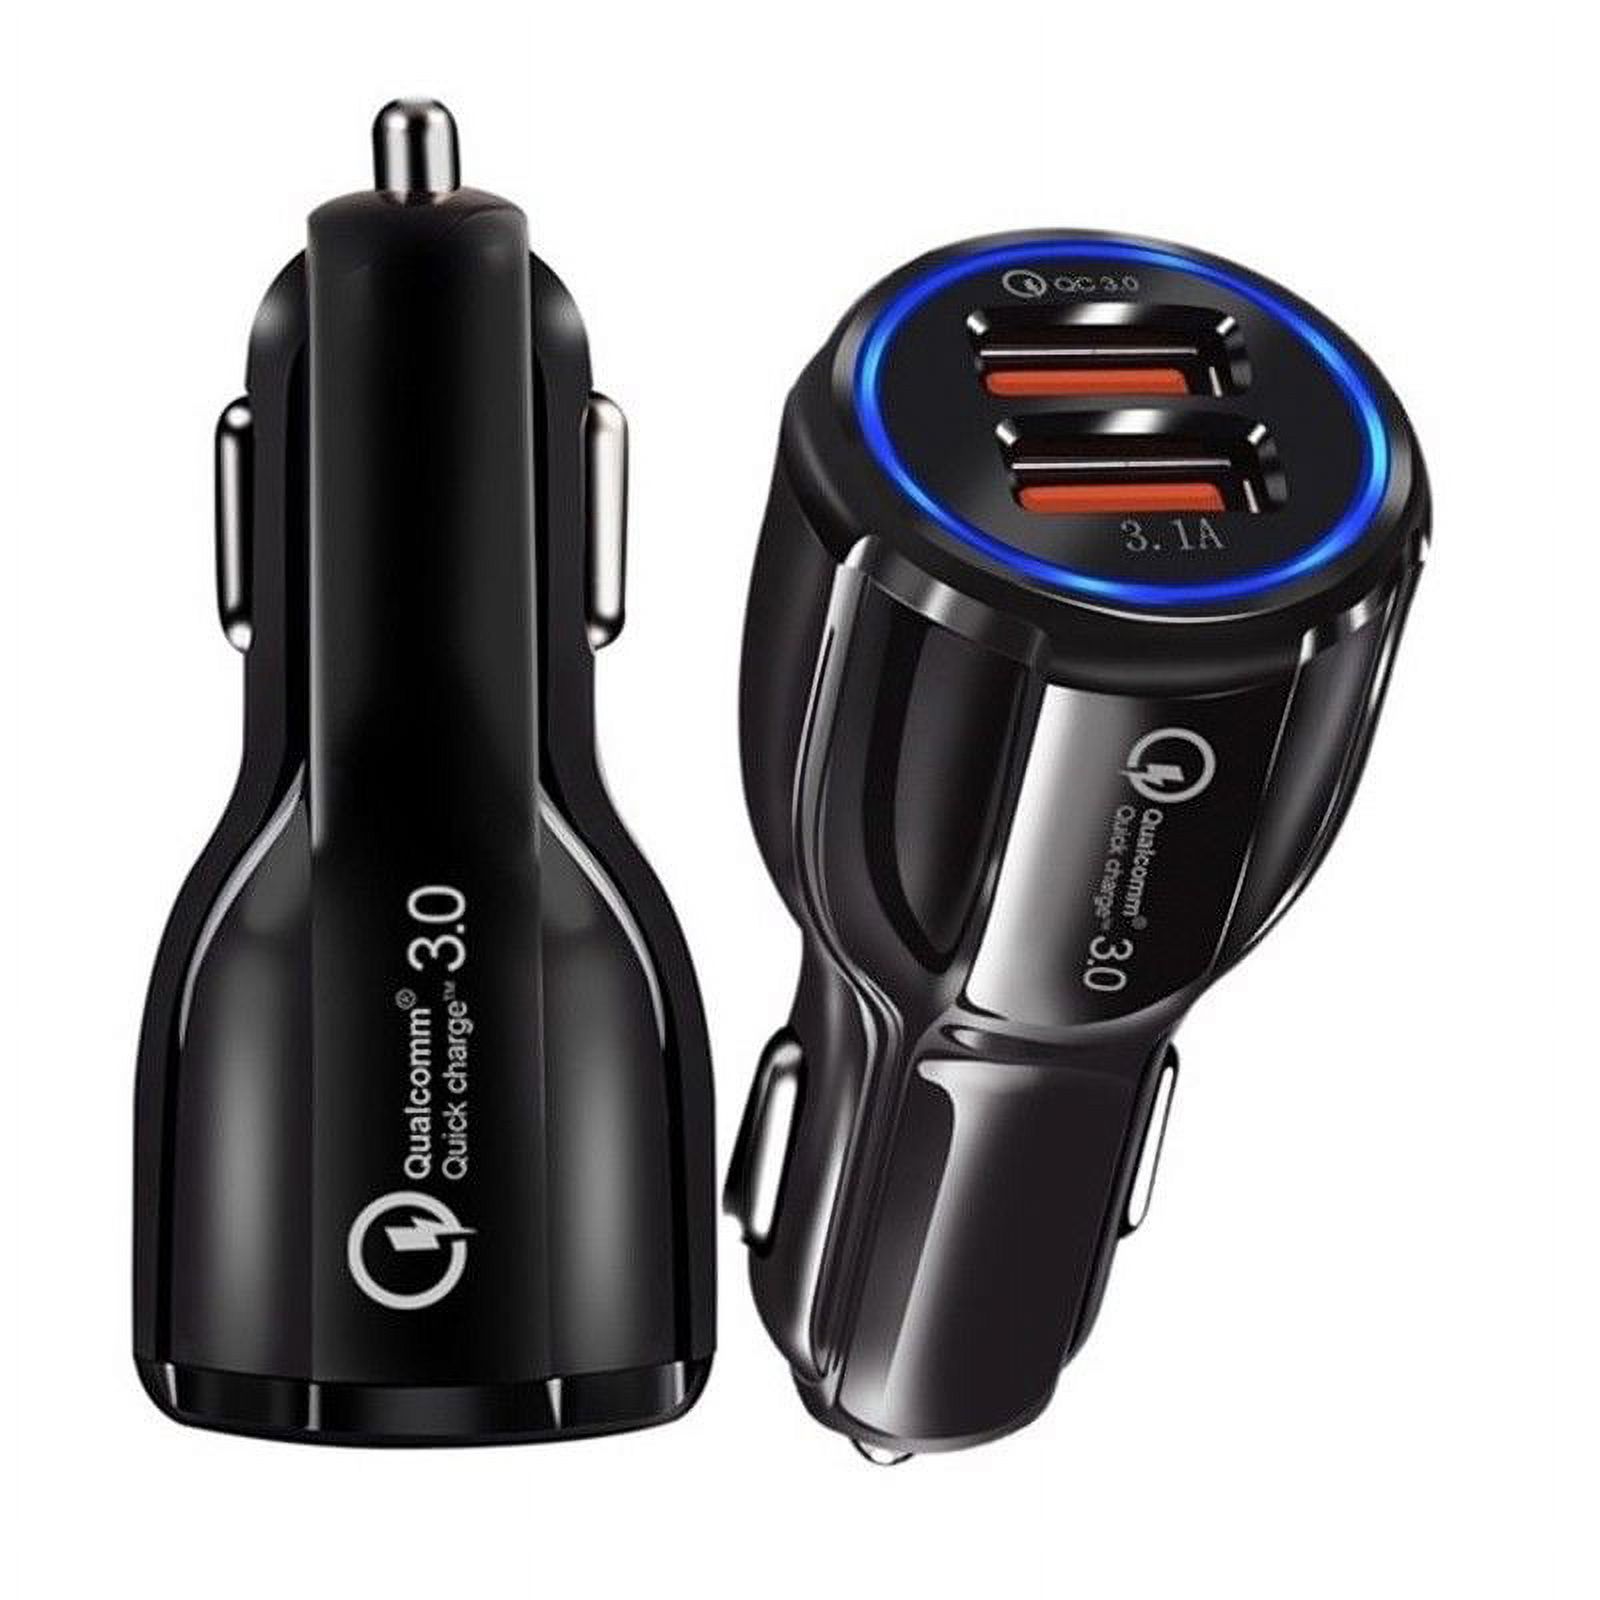 3 Pack Dual USB QualComm Quick Charge Car Charger Fast Dual-Port USB For iPhone X iPhone 8 Plus Samsung Galaxy S8 S8+ Plus S9 S9+ Plus Note 9 S7 Edge Note 4 LG G7 OnePlus 5 Google Pixel 2 XL Black - image 3 of 10